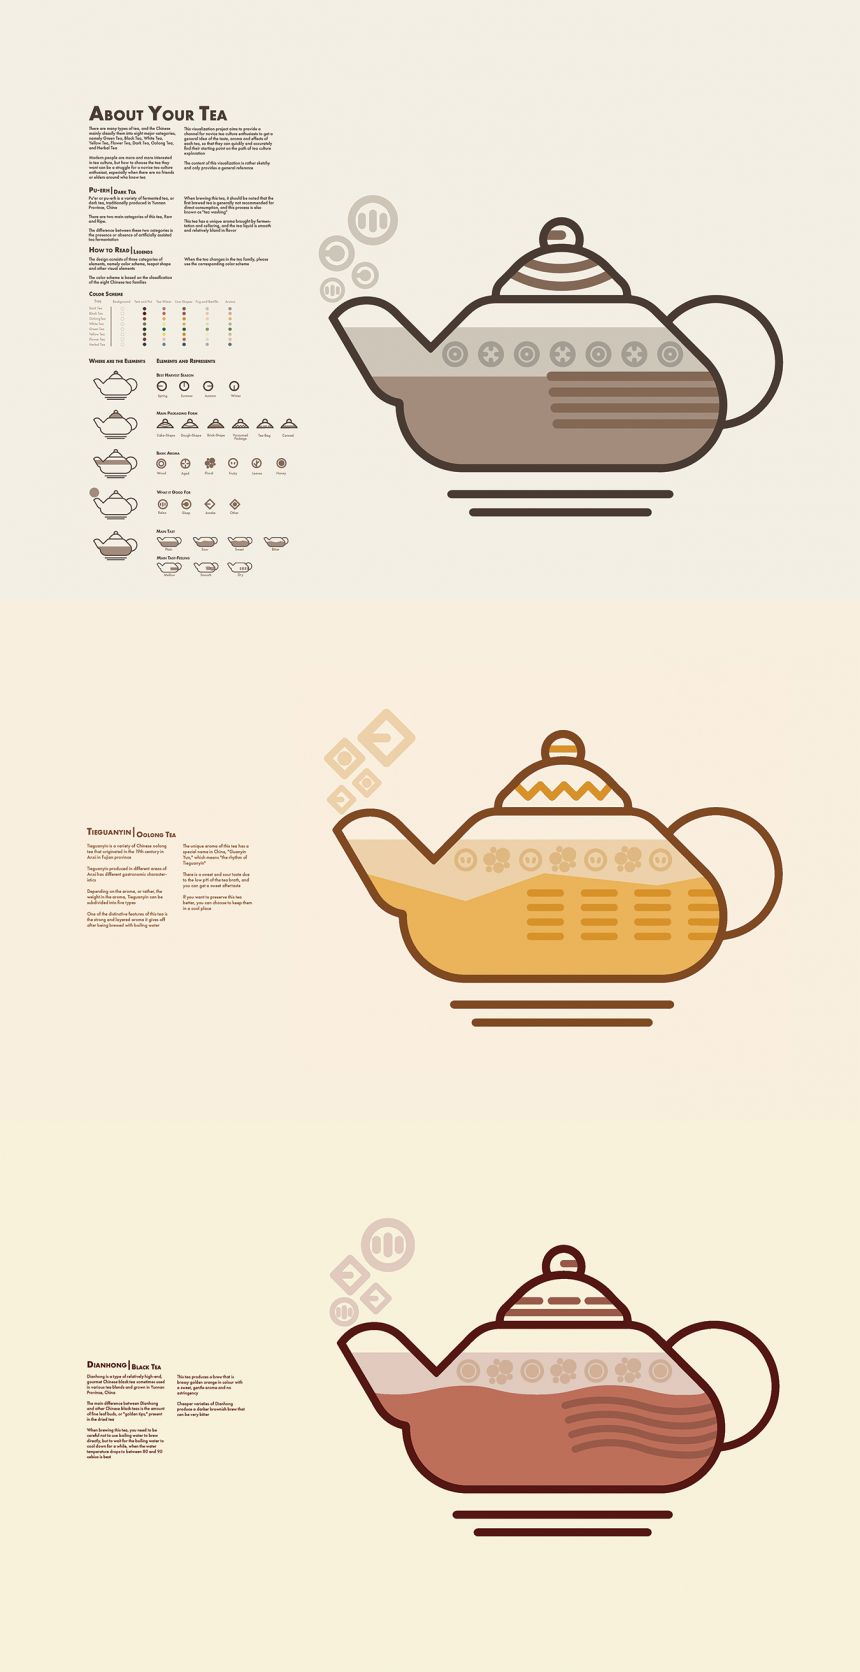 A poster featuring three teapots with a color scheme associated with the different elements of tea such as aroma, taste, packaging form and harvesting season.